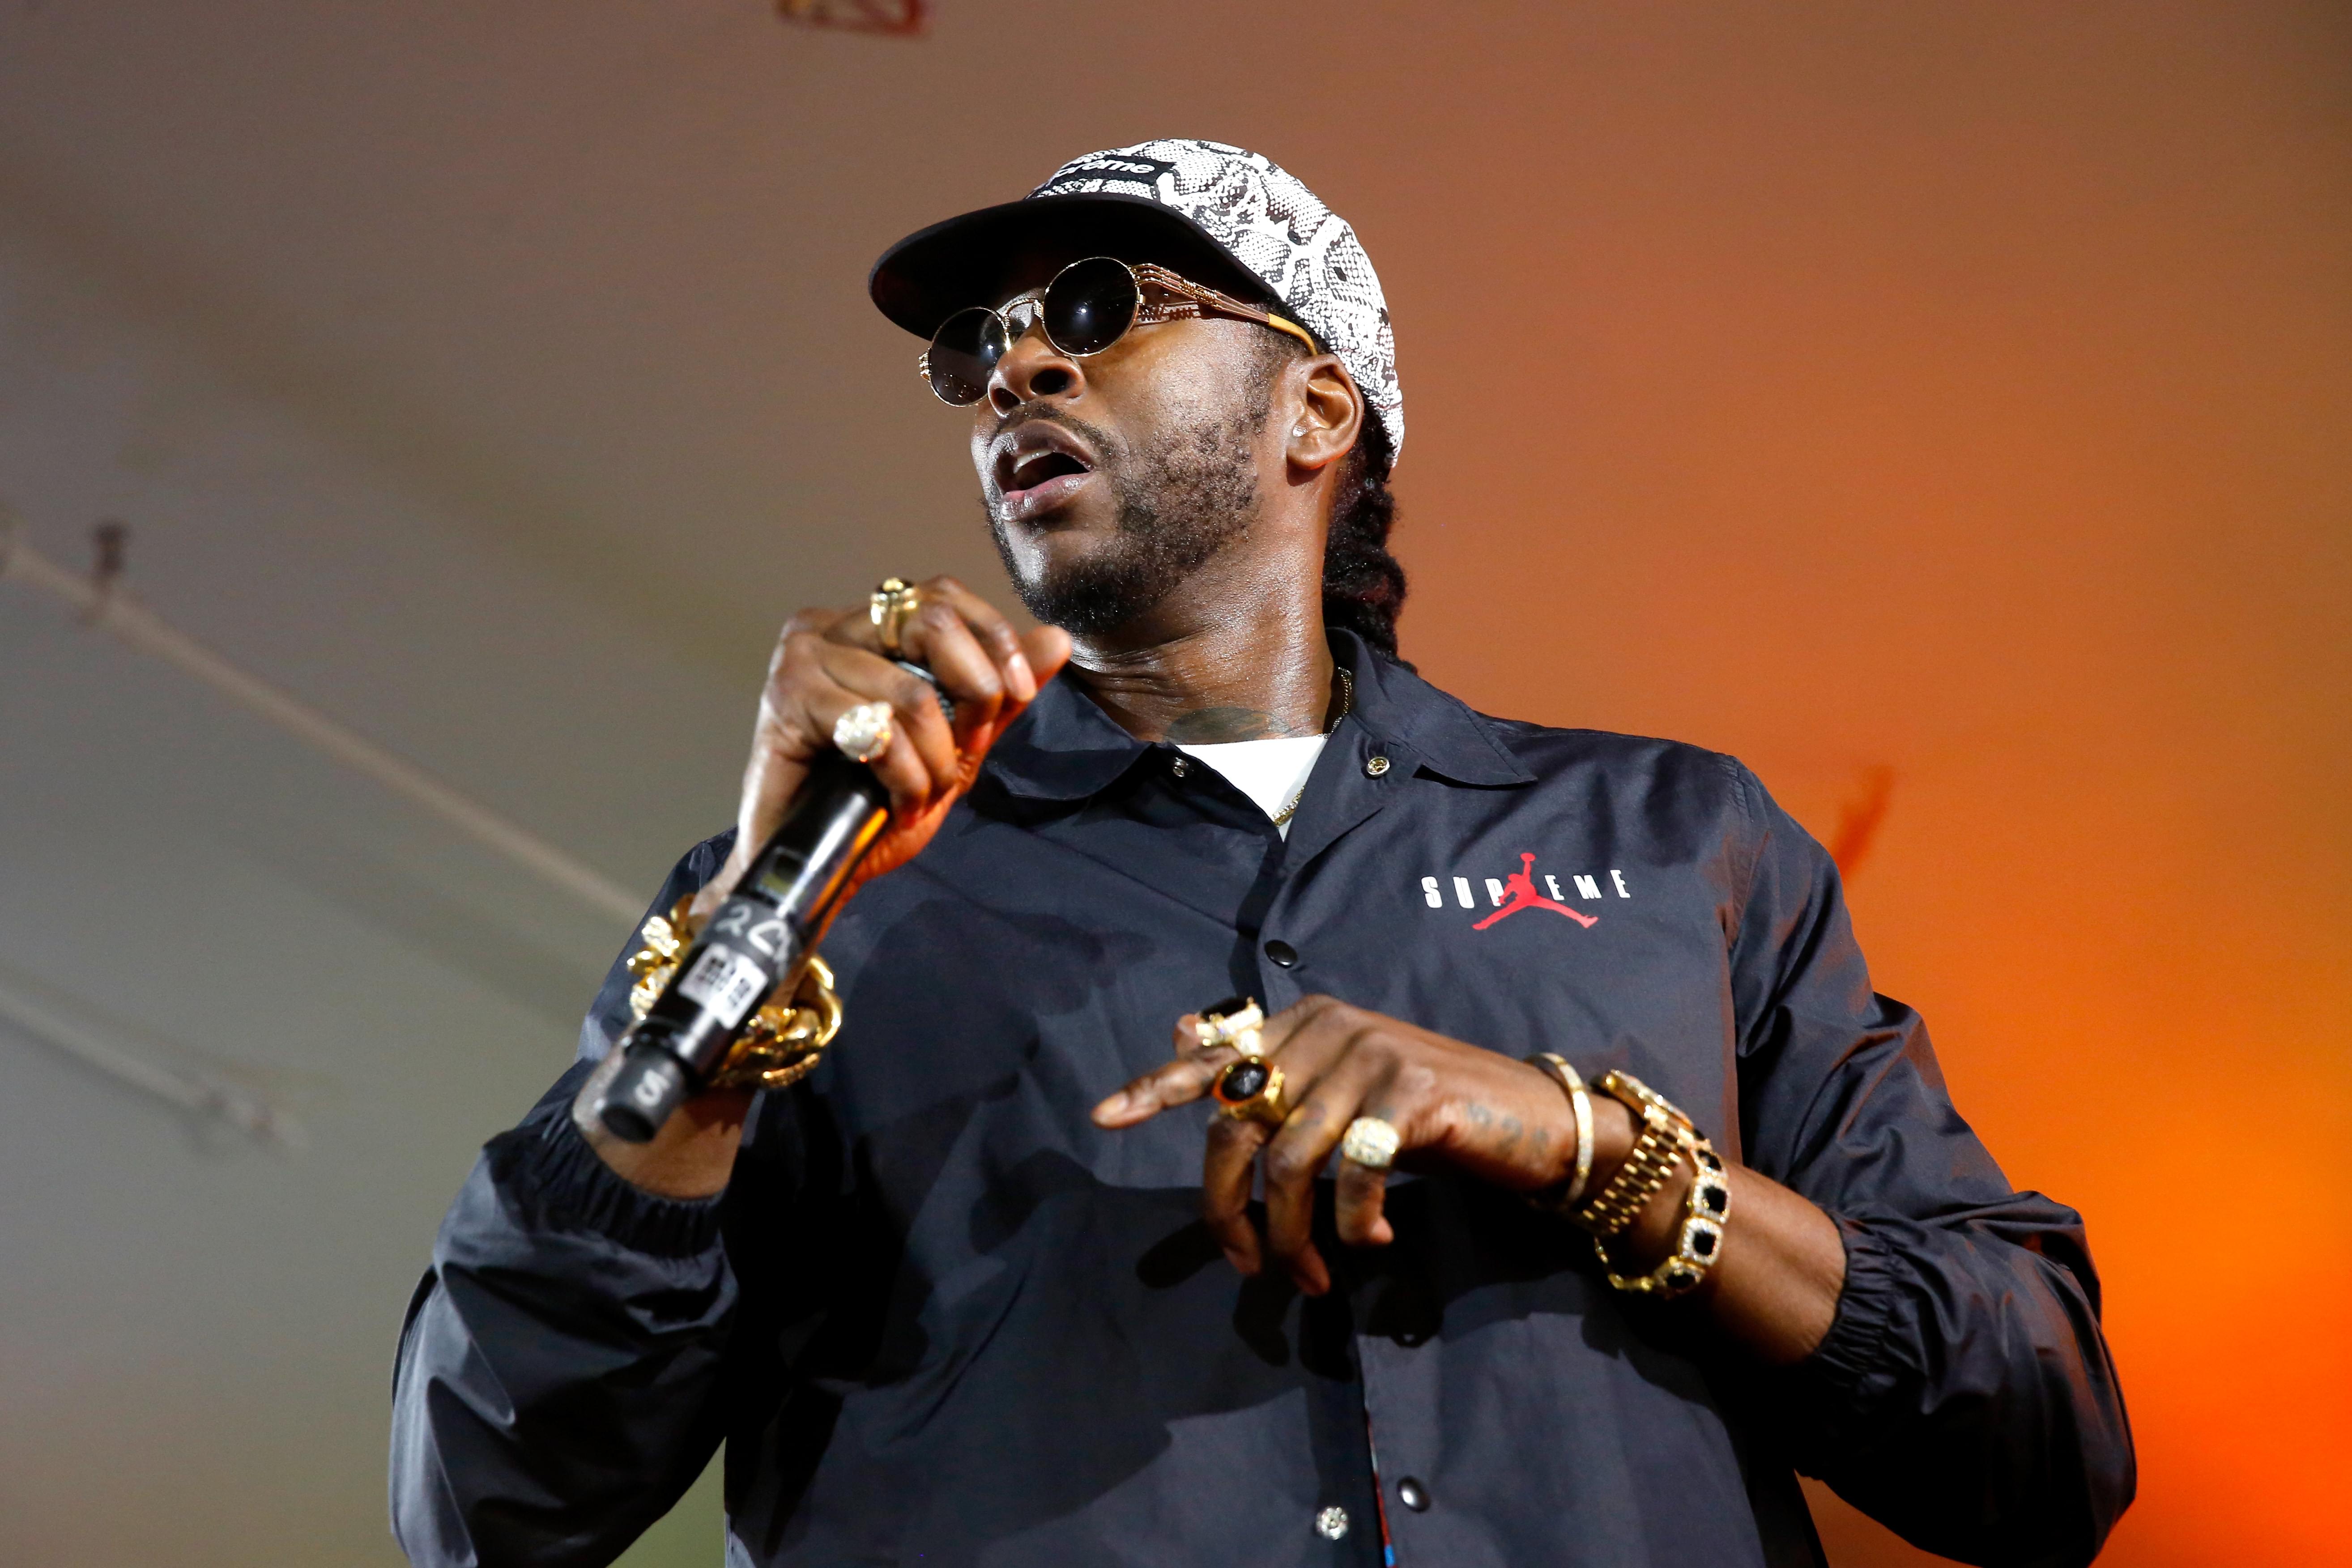 Cali Christmas Artist 2 Chainz Donating In-Style To Veterans